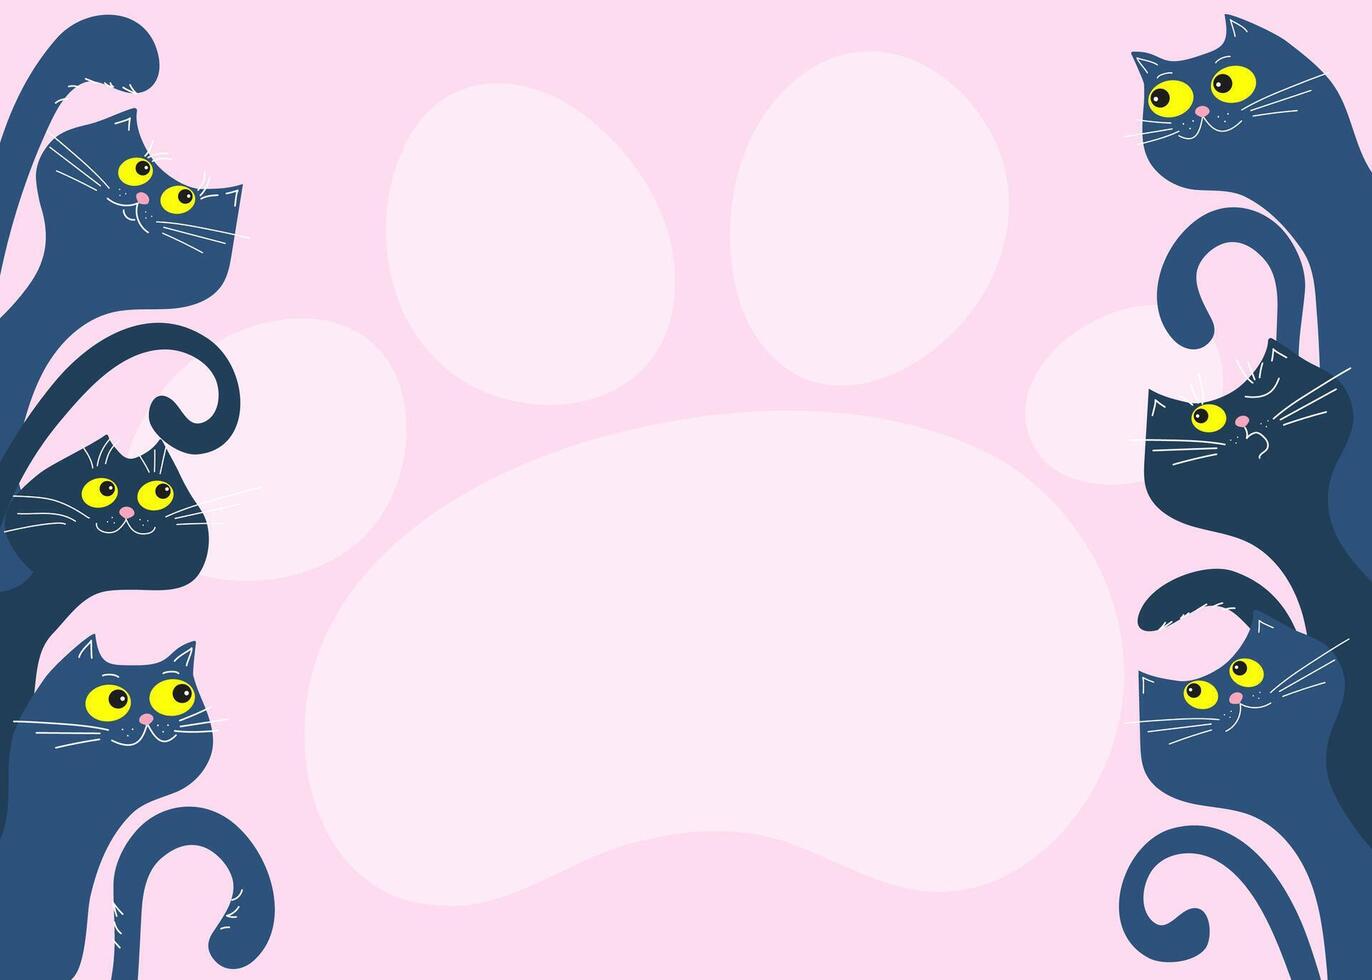 Pets frame, cute cartoon cats. Place for text. Footprint, animals paw print. background for print design. Notification banner concept illustration. vector